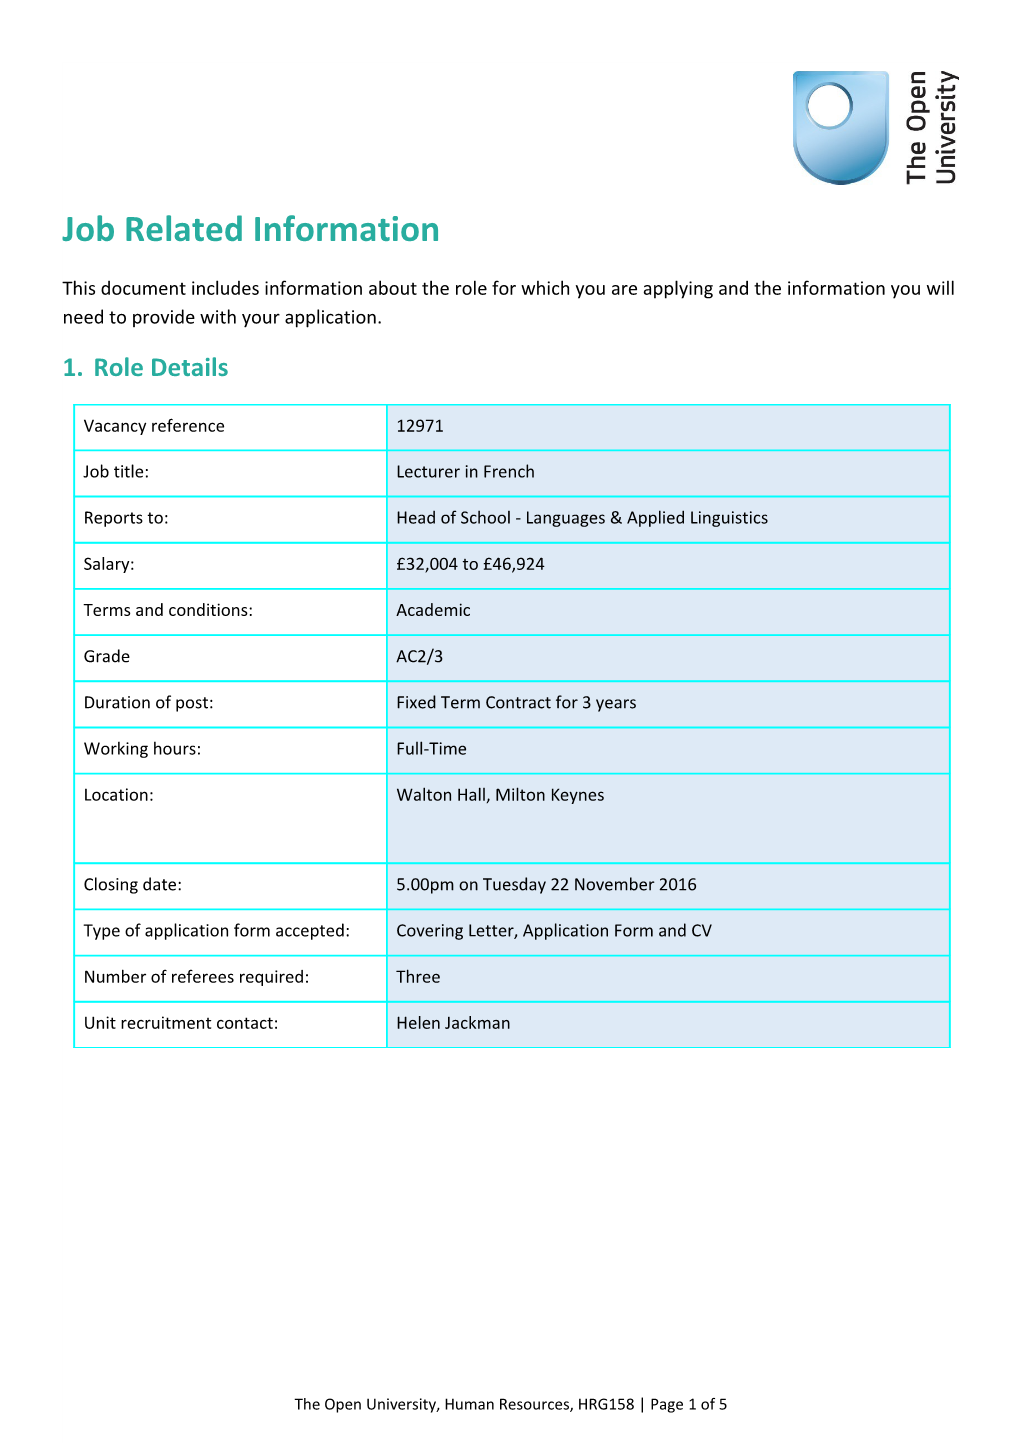 Job Related Information Template HRG158